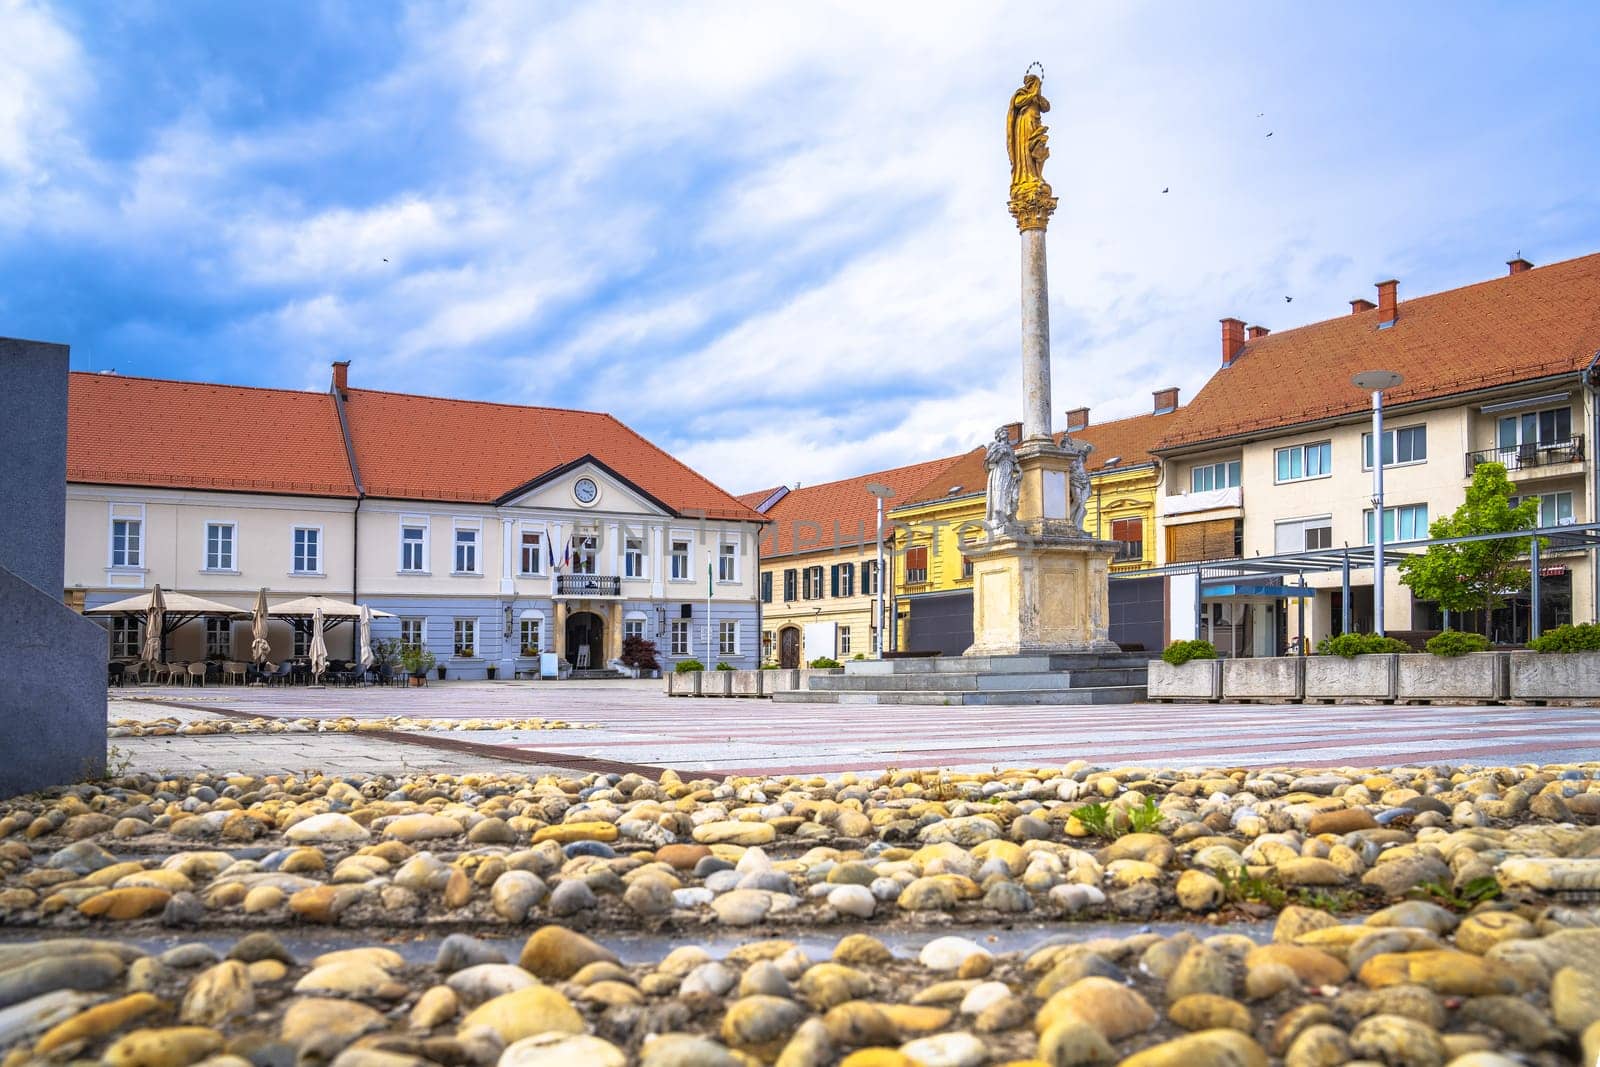 Town of Ljutomer central square view by xbrchx